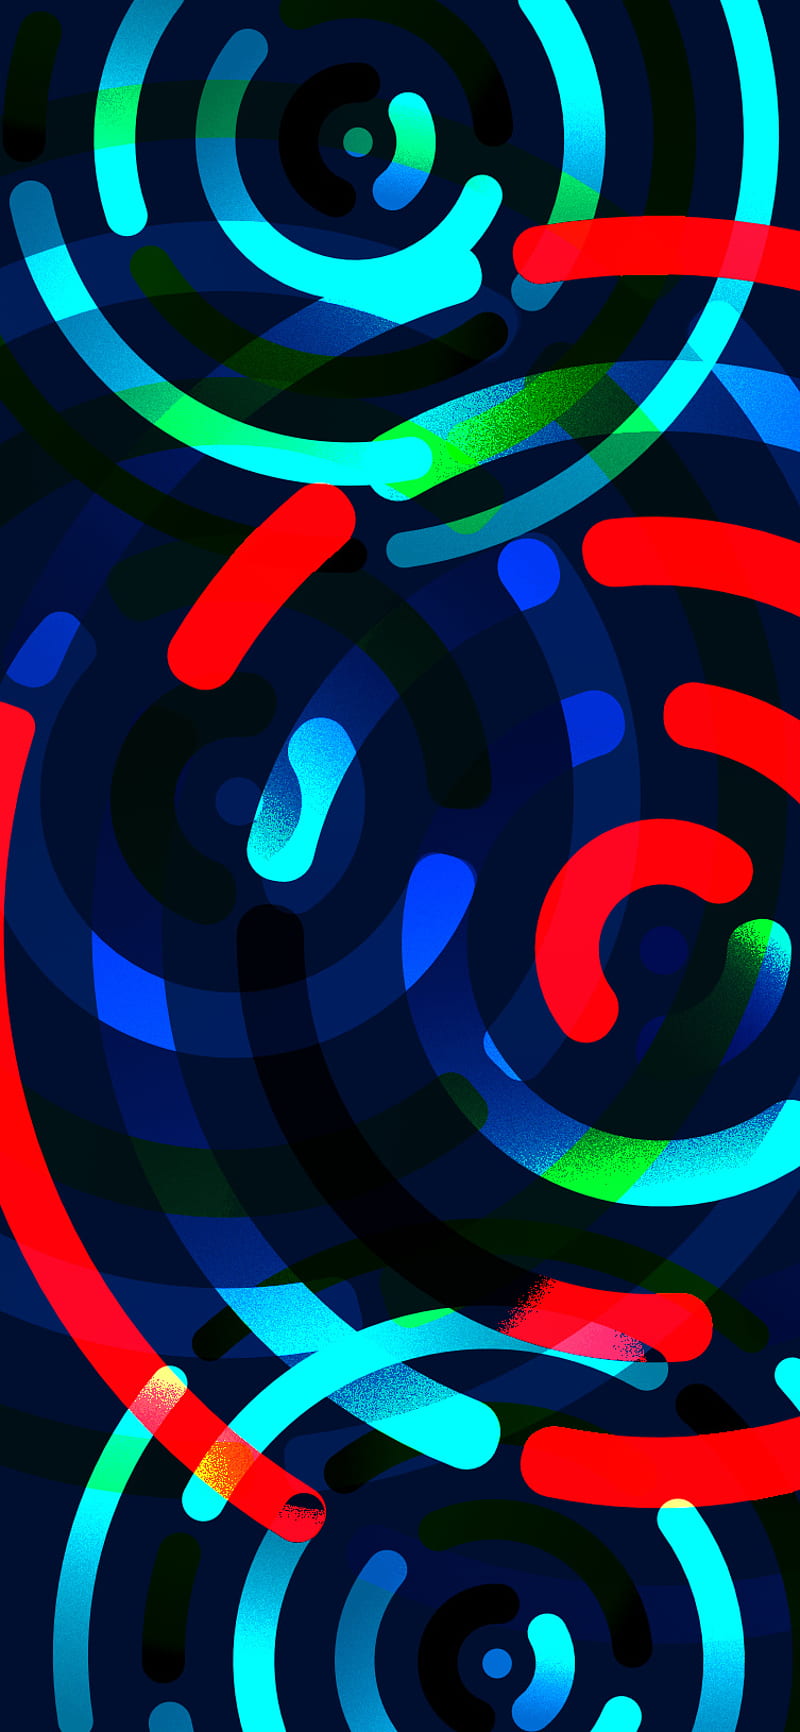 Timewarp, affinity, bright, circles, colours, neon, radial, space, time, time travel, vivid, HD phone wallpaper